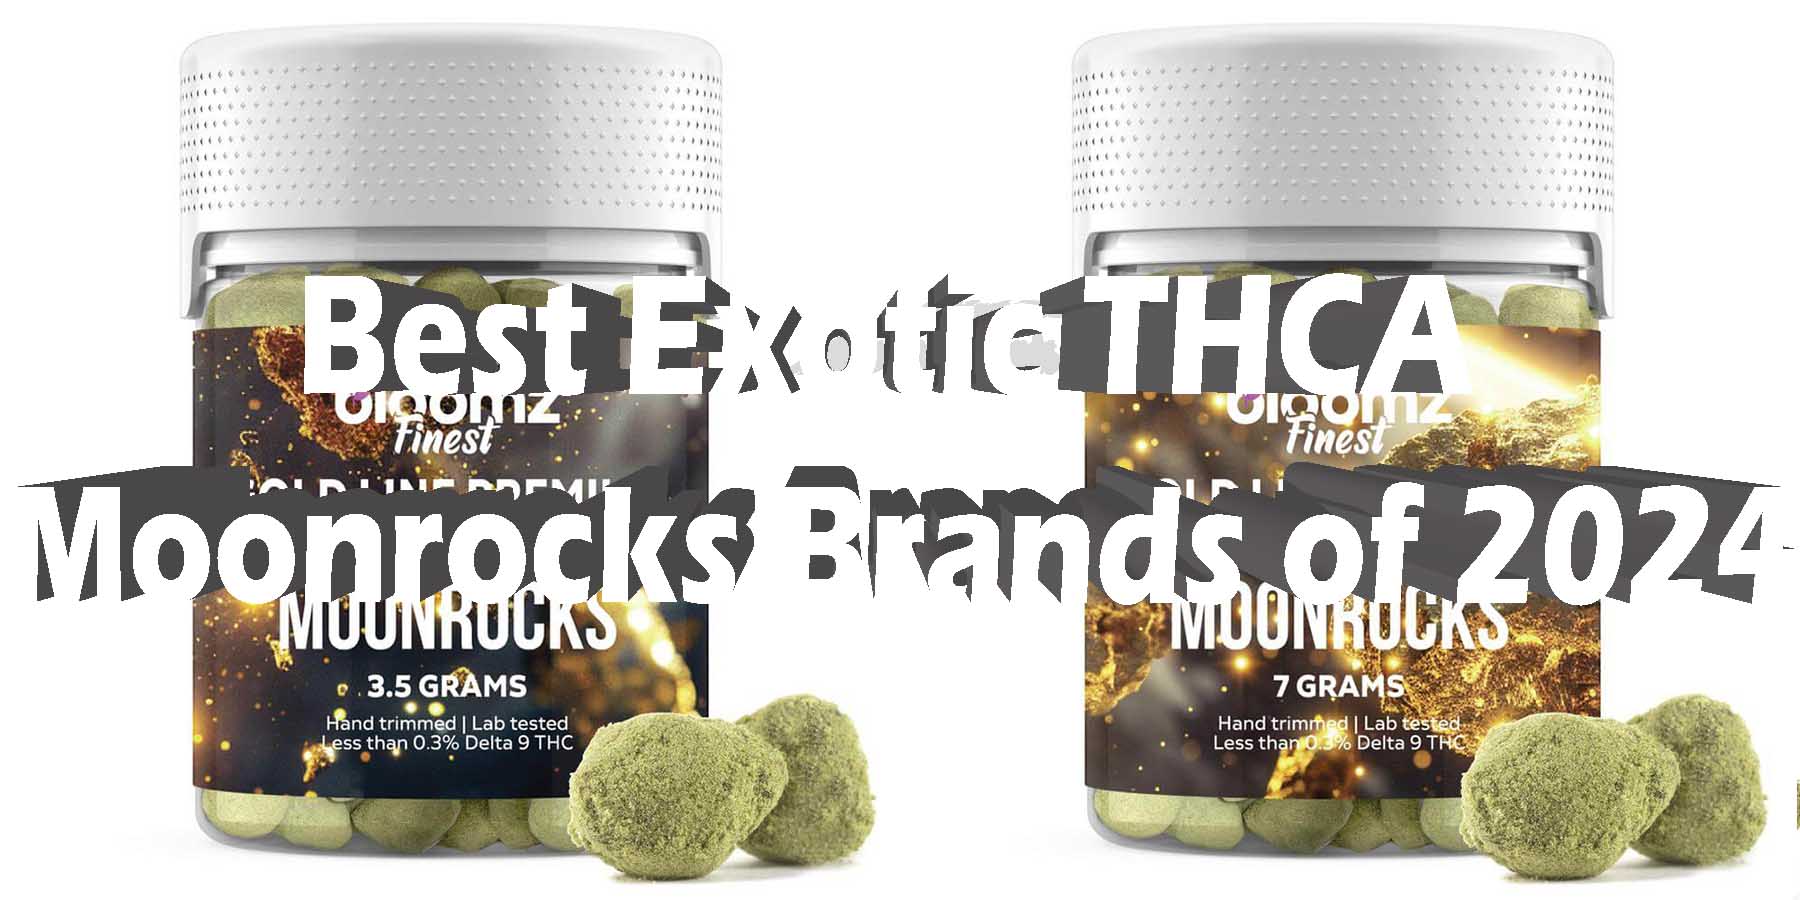 Best Exotic THCA Moonrocks Brands of 2024 Take Them Safely LowestPrice Coupon Discount For Smoking Best High Smoke Shop Online Near Me Bloomz